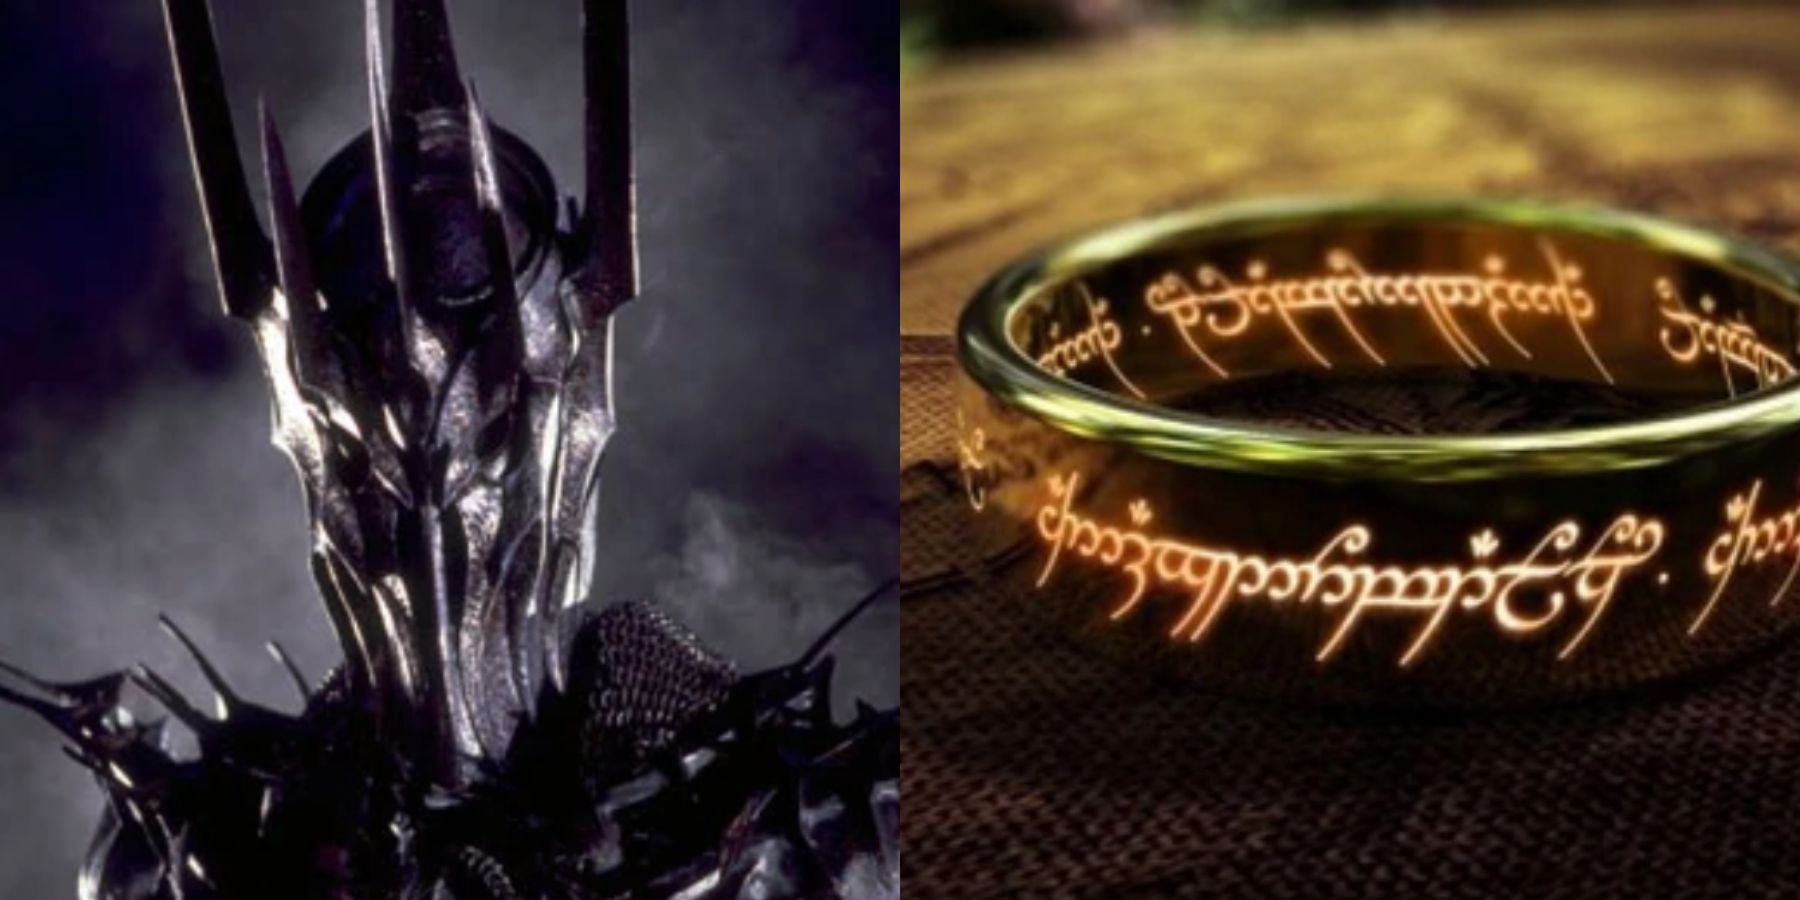 Sauron and the One Ring from Lord of the Rings